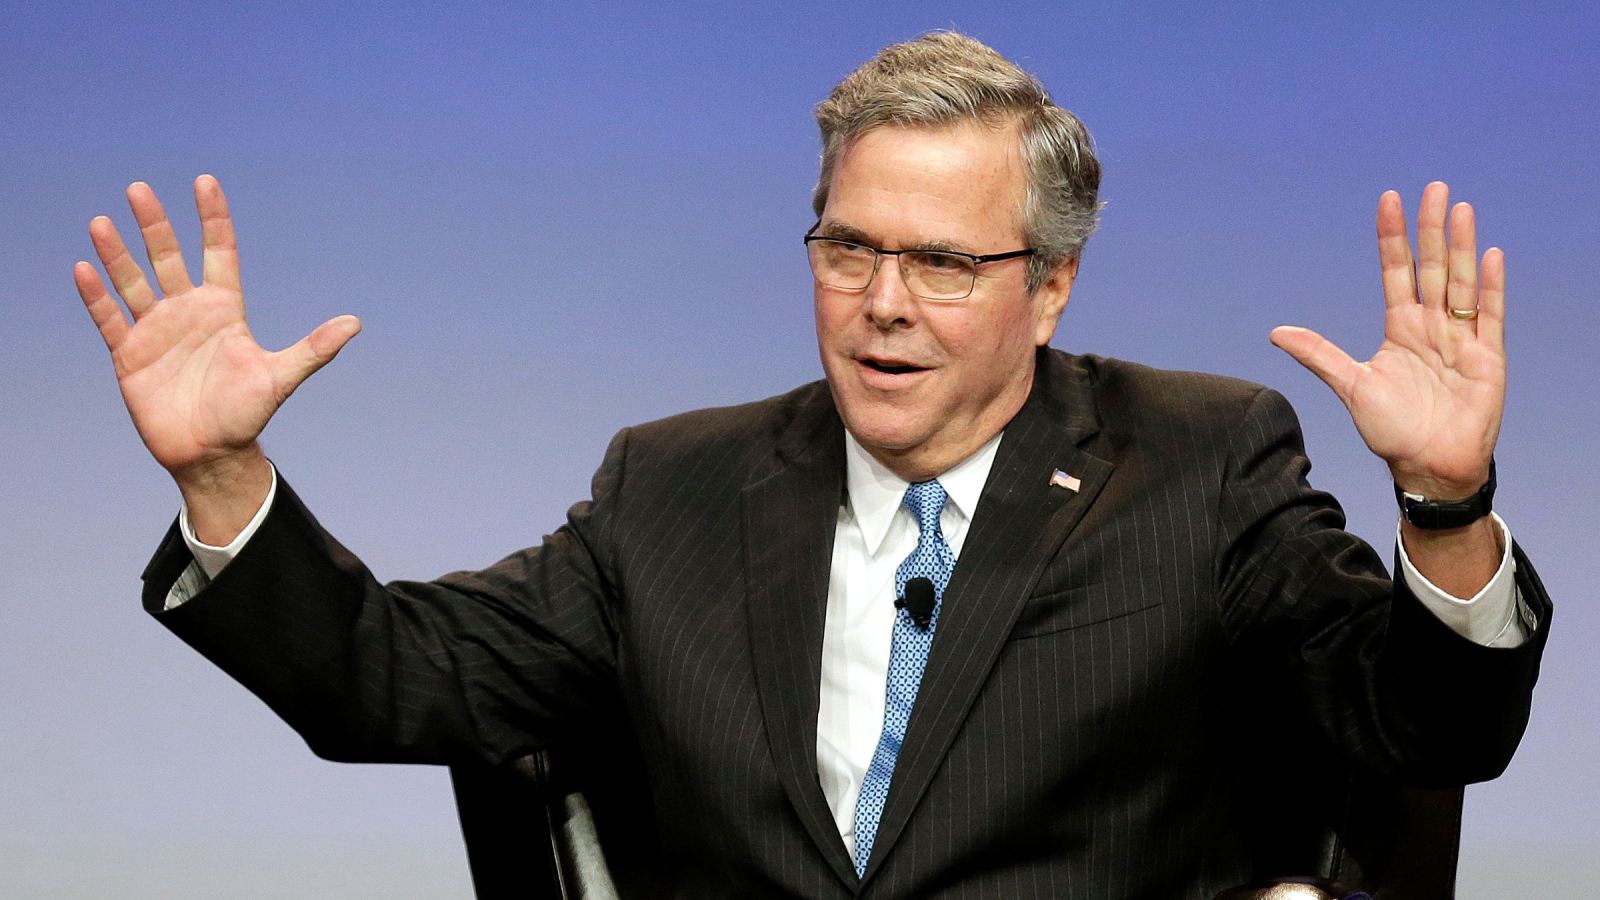 Jeb Bush: Trump is ‘uninformed’ and ‘preying on people’s fears’